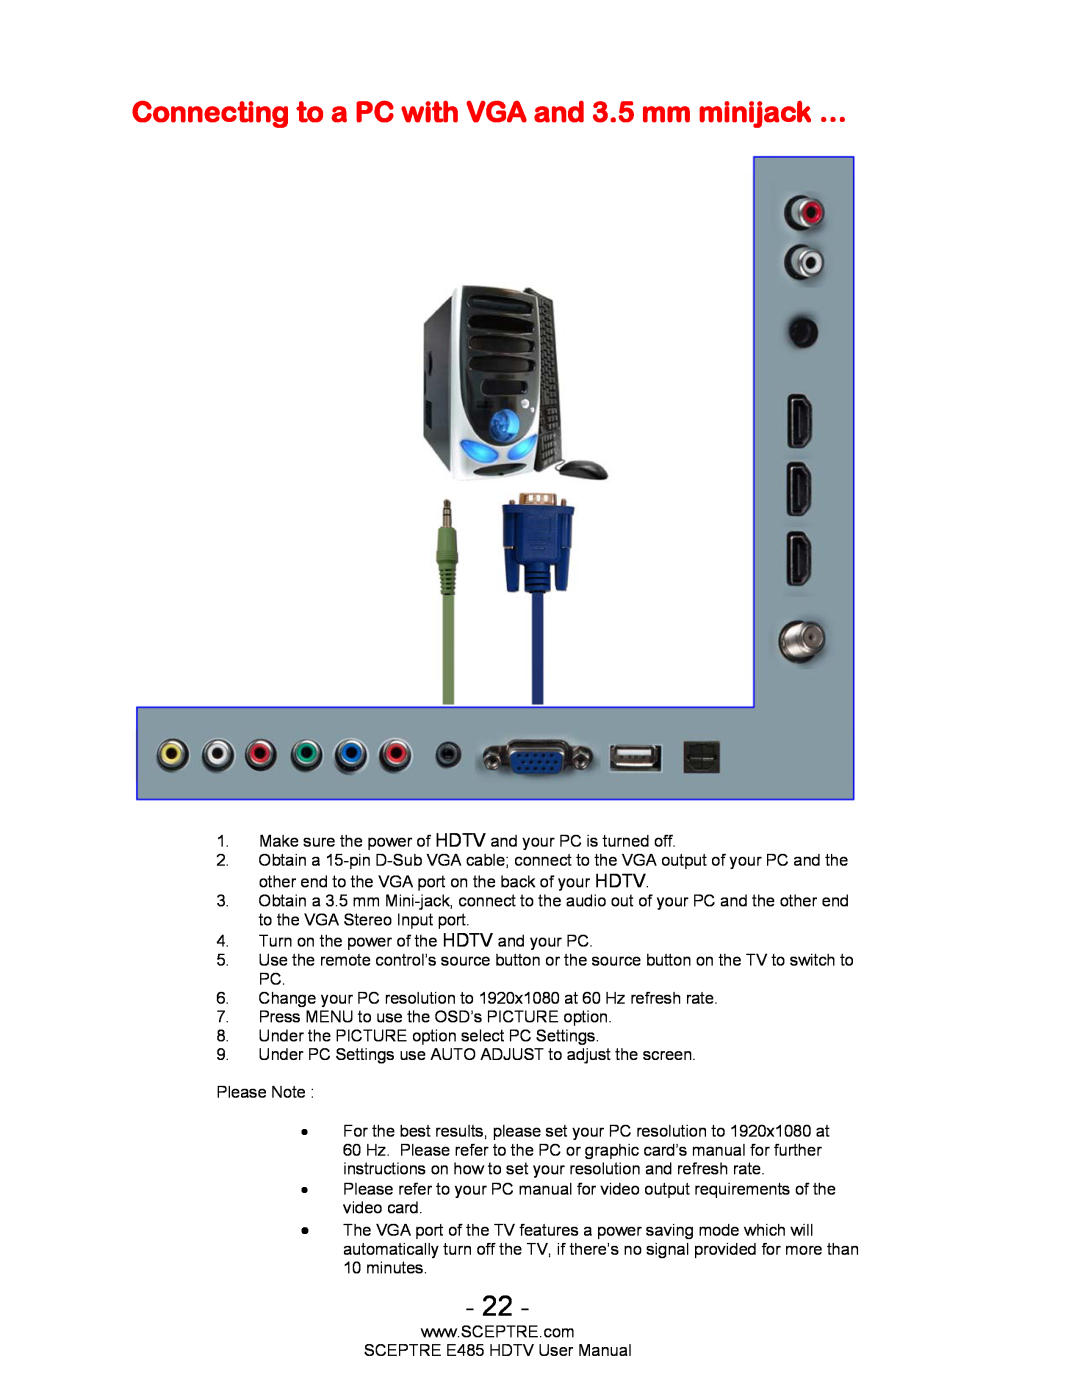 Sceptre Technologies E485 user manual Connecting to a PC with VGA and 3.5 mm minijack … 